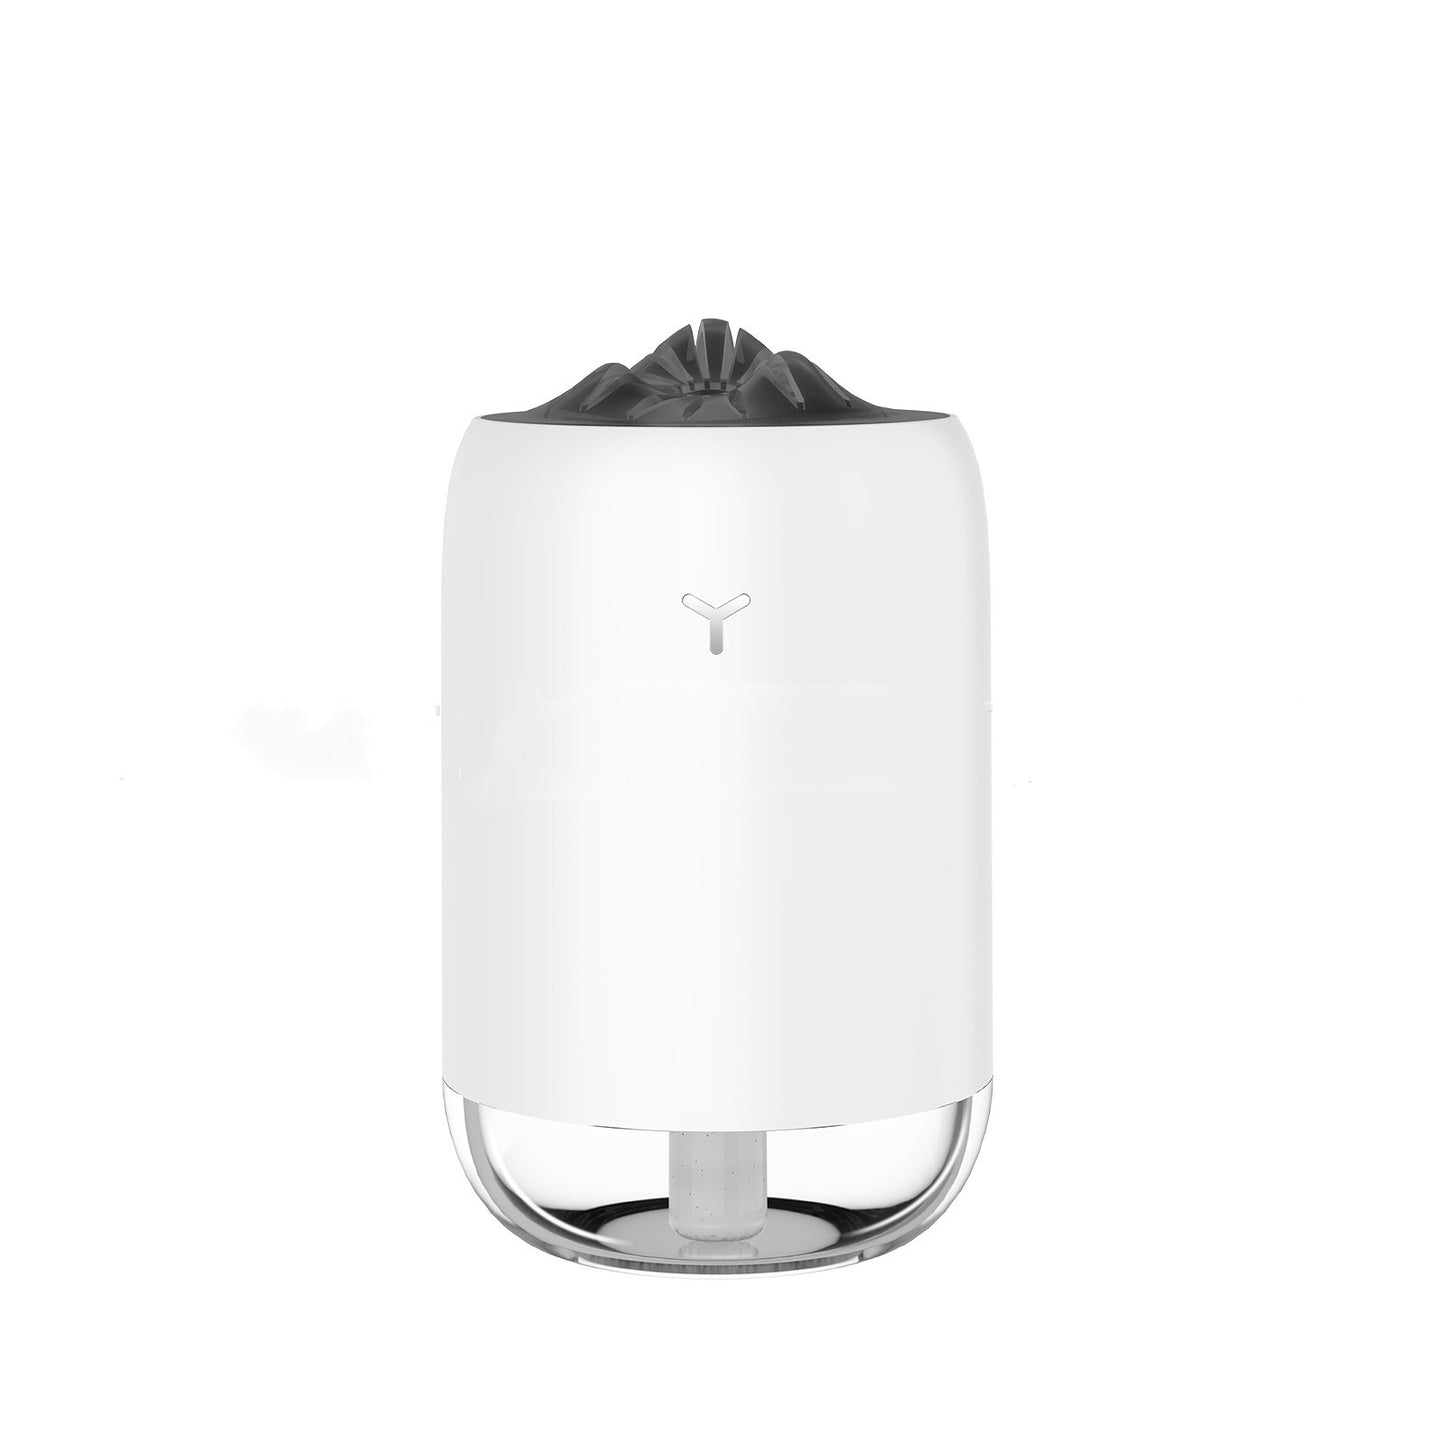 Mini USB Humidifier Aromatherapy for Home, Car or Office Aroma Diffuser